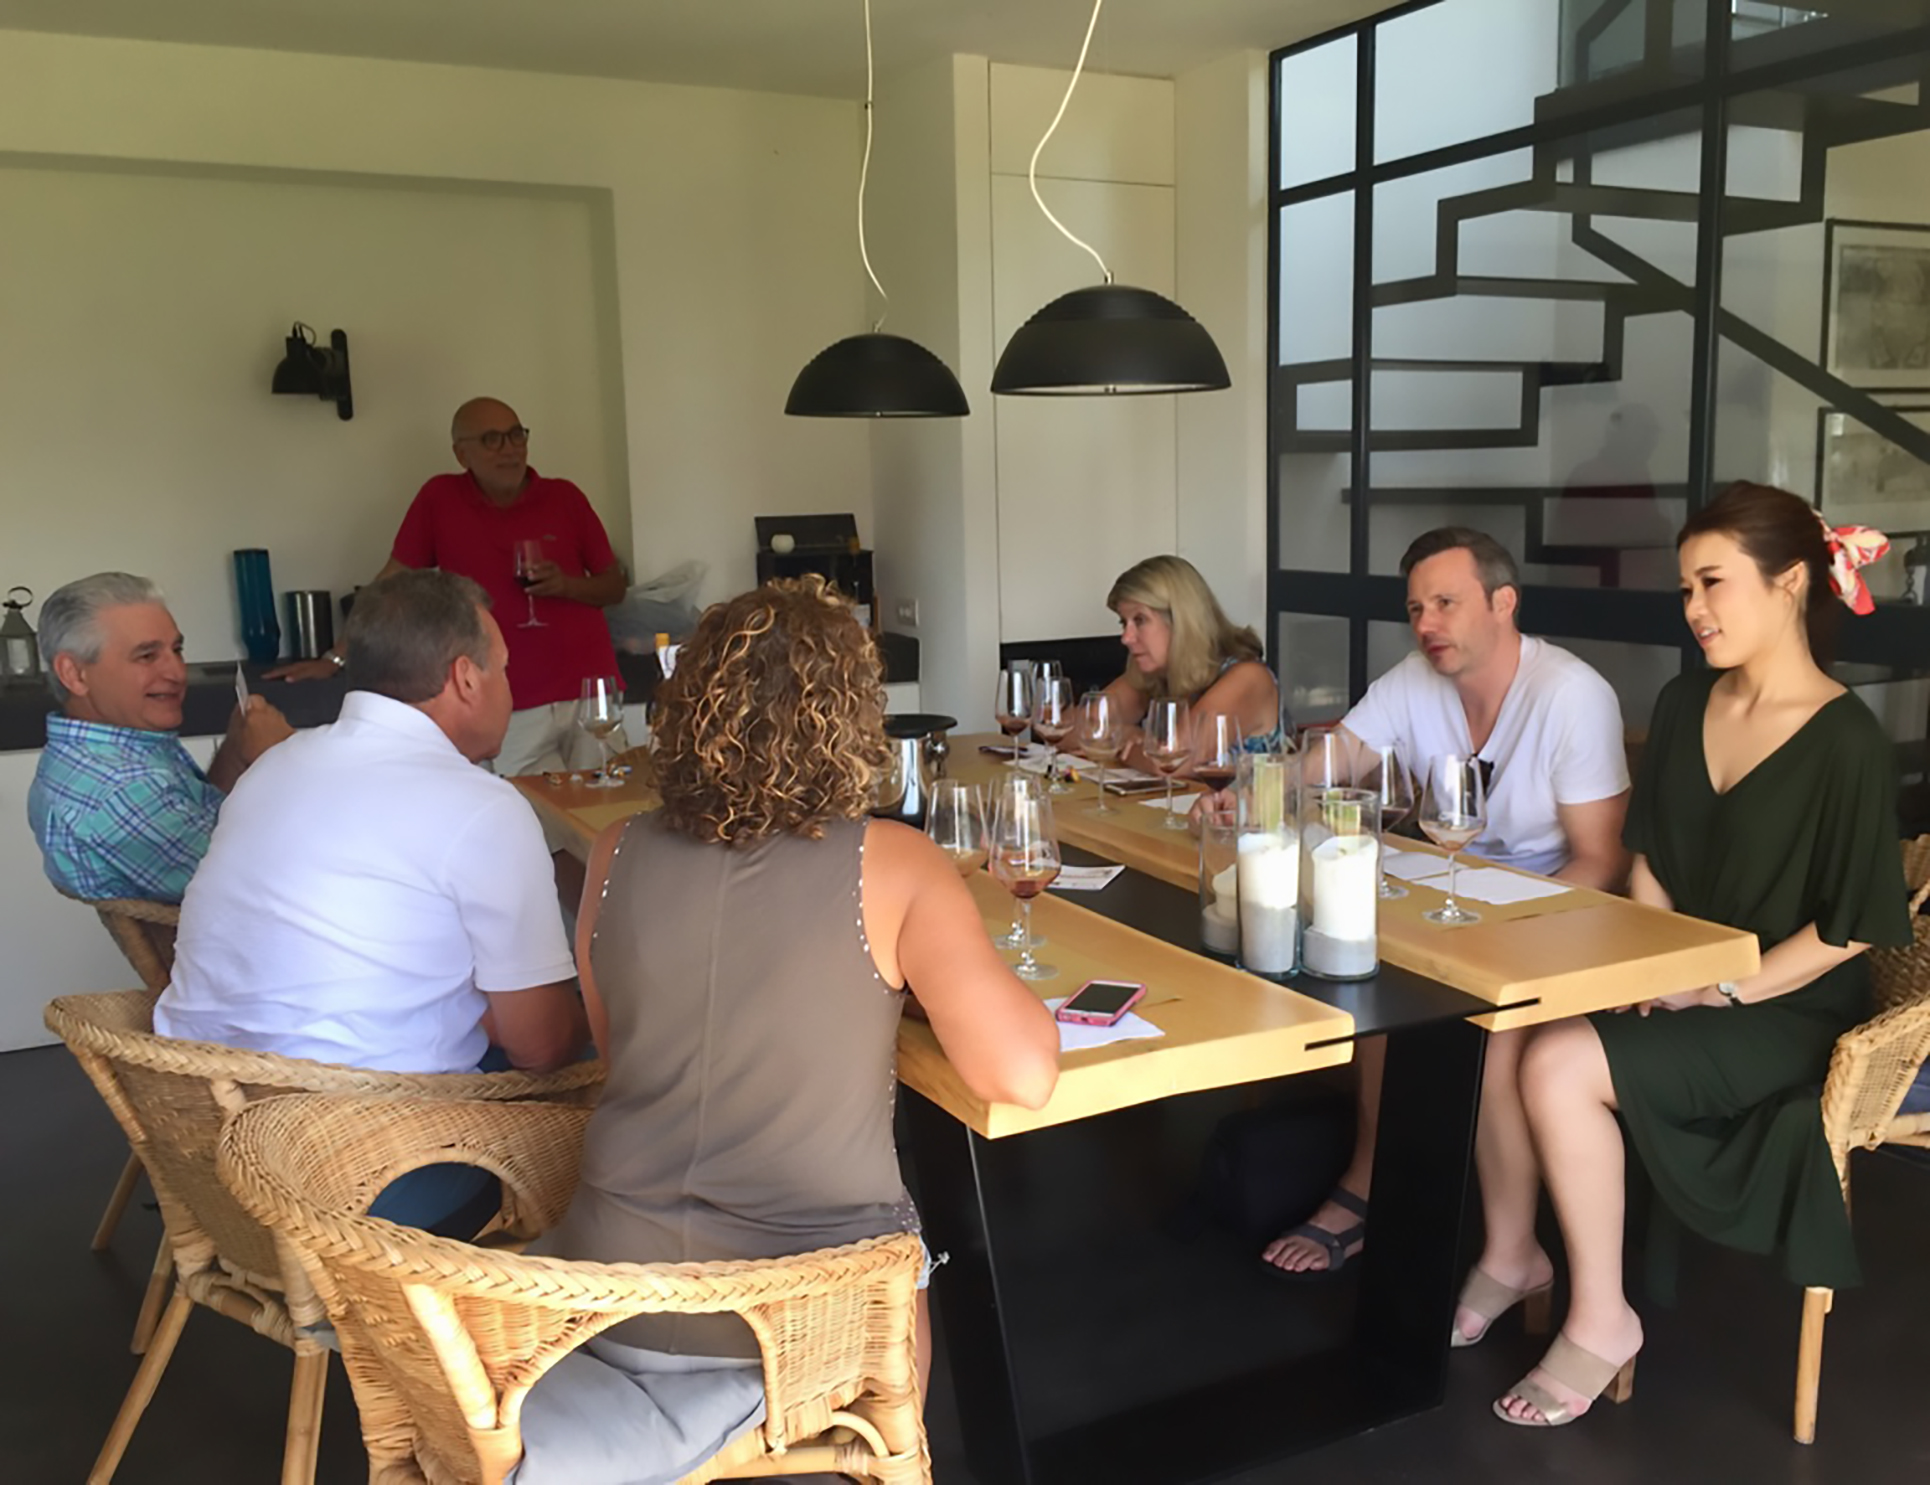 Wine tasting and extra virgin olive oil produced by La Salceta